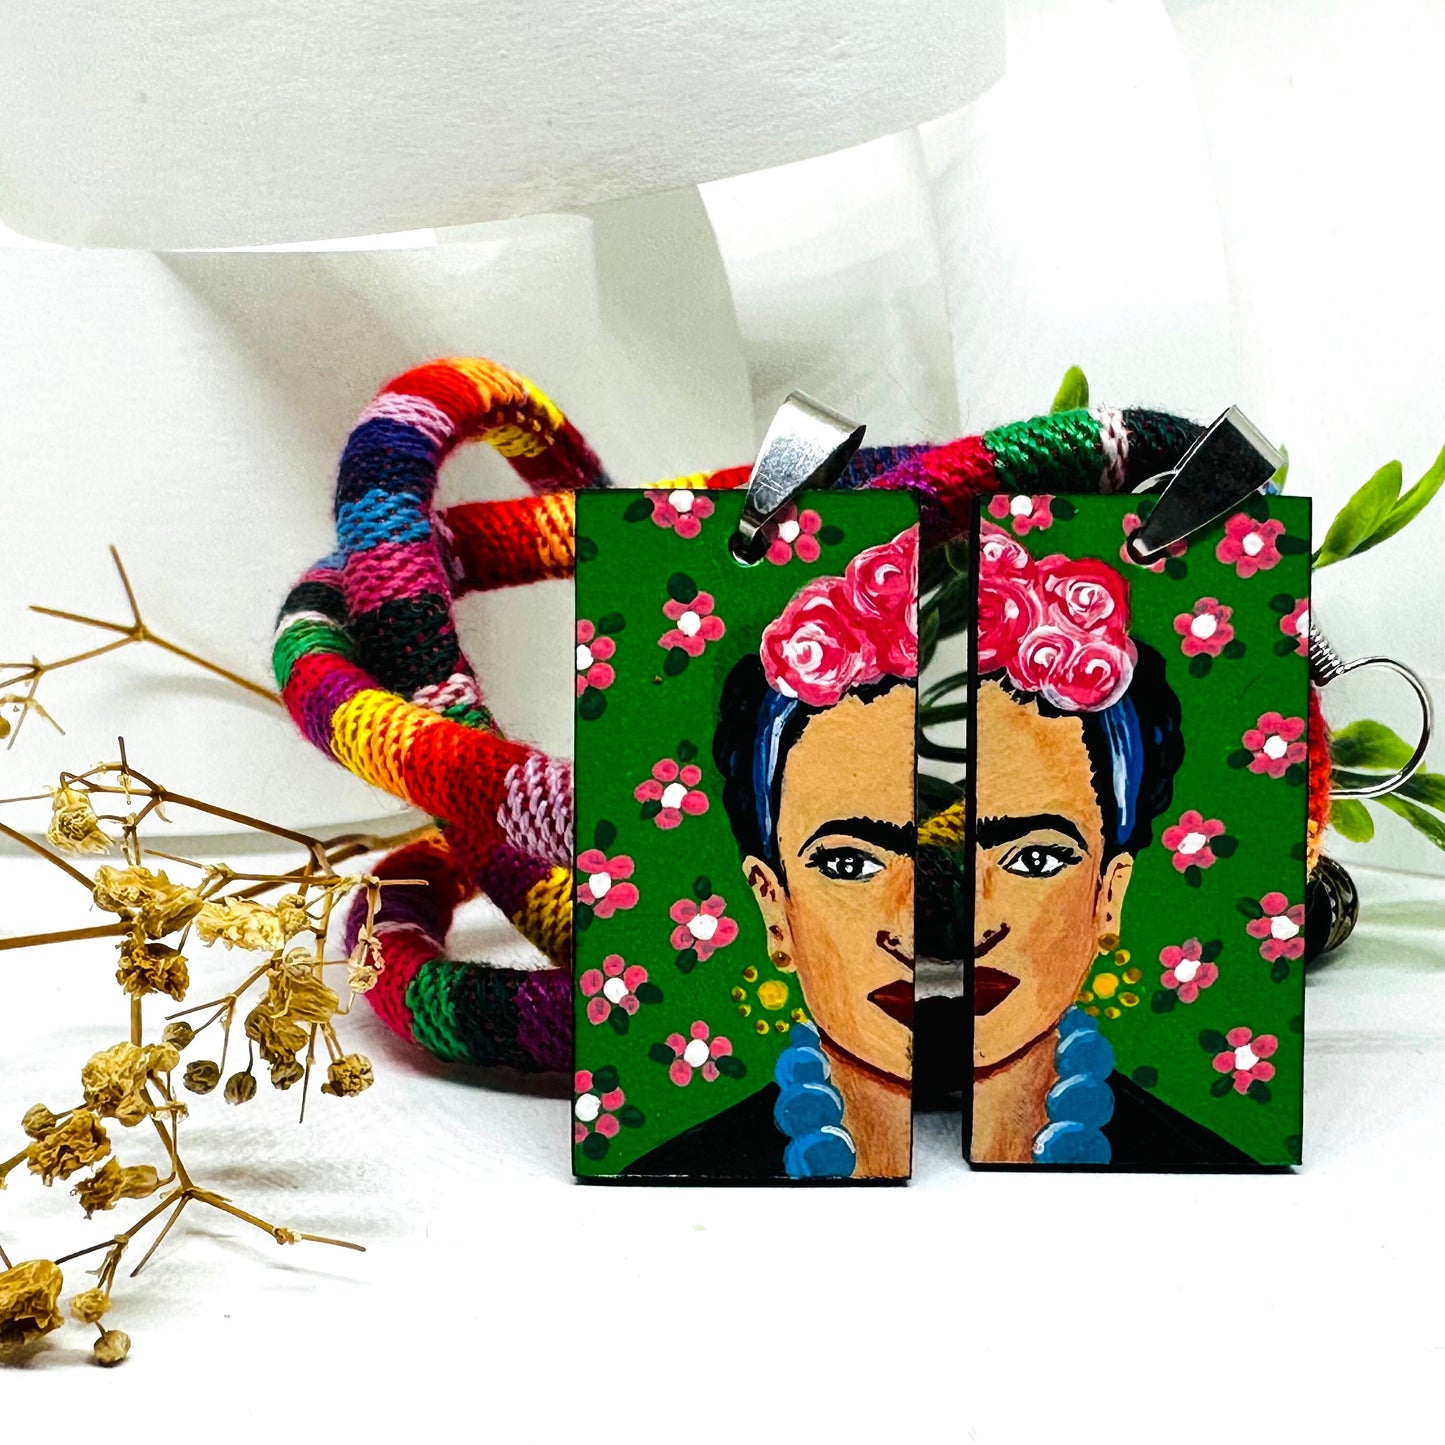 Cool Frida Inspired Earrings Hand Painted Artfully Designed Mexican Jewelry Mexico Folk Art to Wear Wooden Rectangular Asymmetrical Earrings